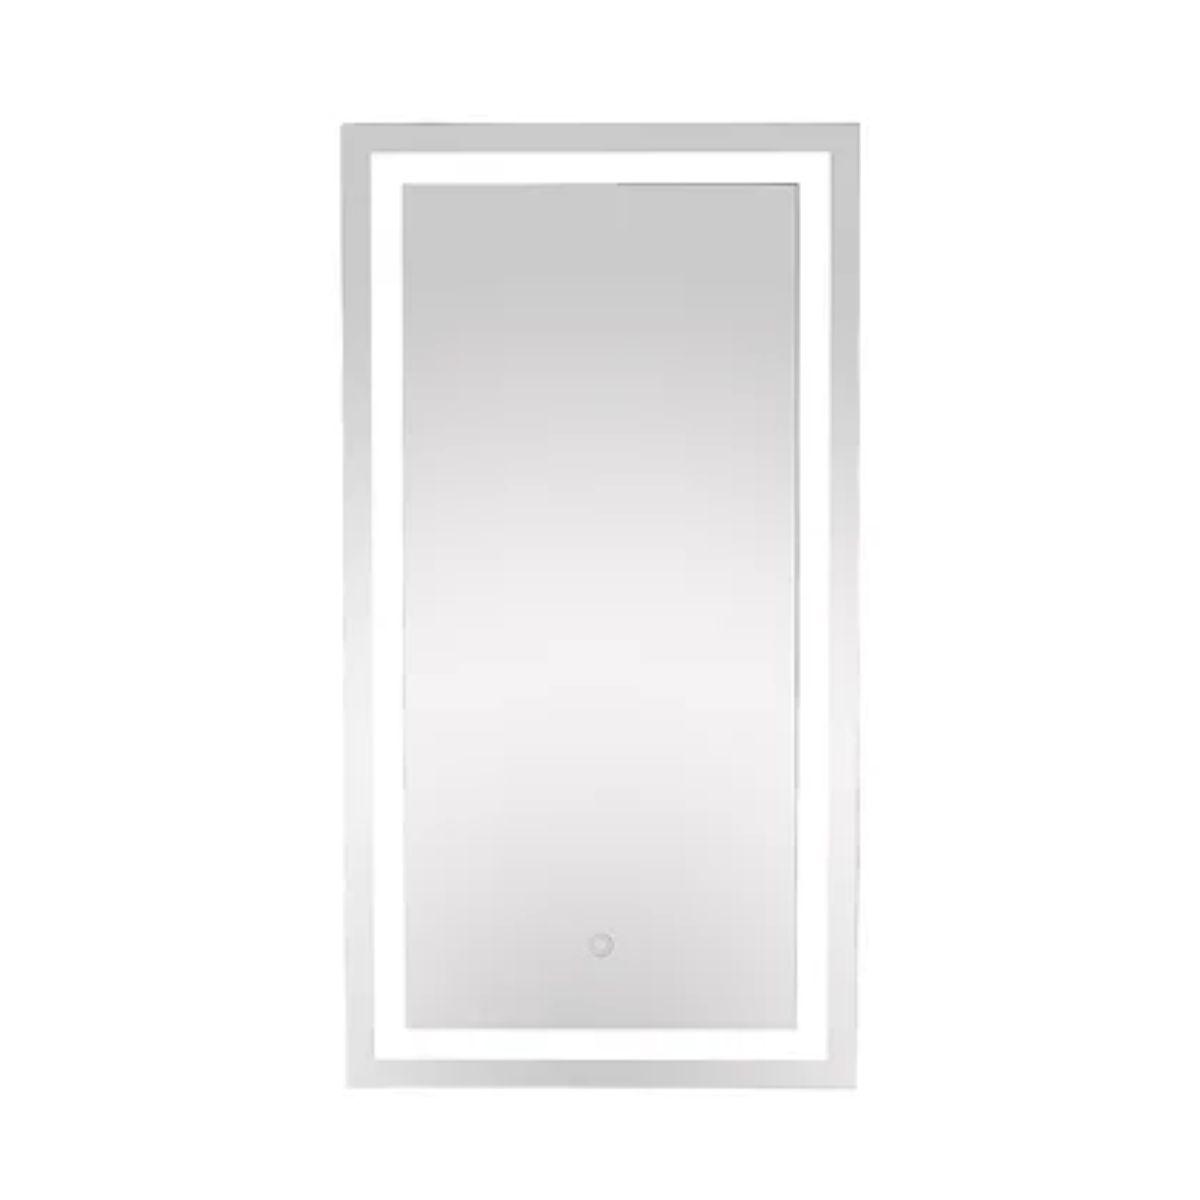 Edison 16 In. X 30 In. Tri-color LED Single Door Cabinet Mirror With Touch On/Off Dimmer Function